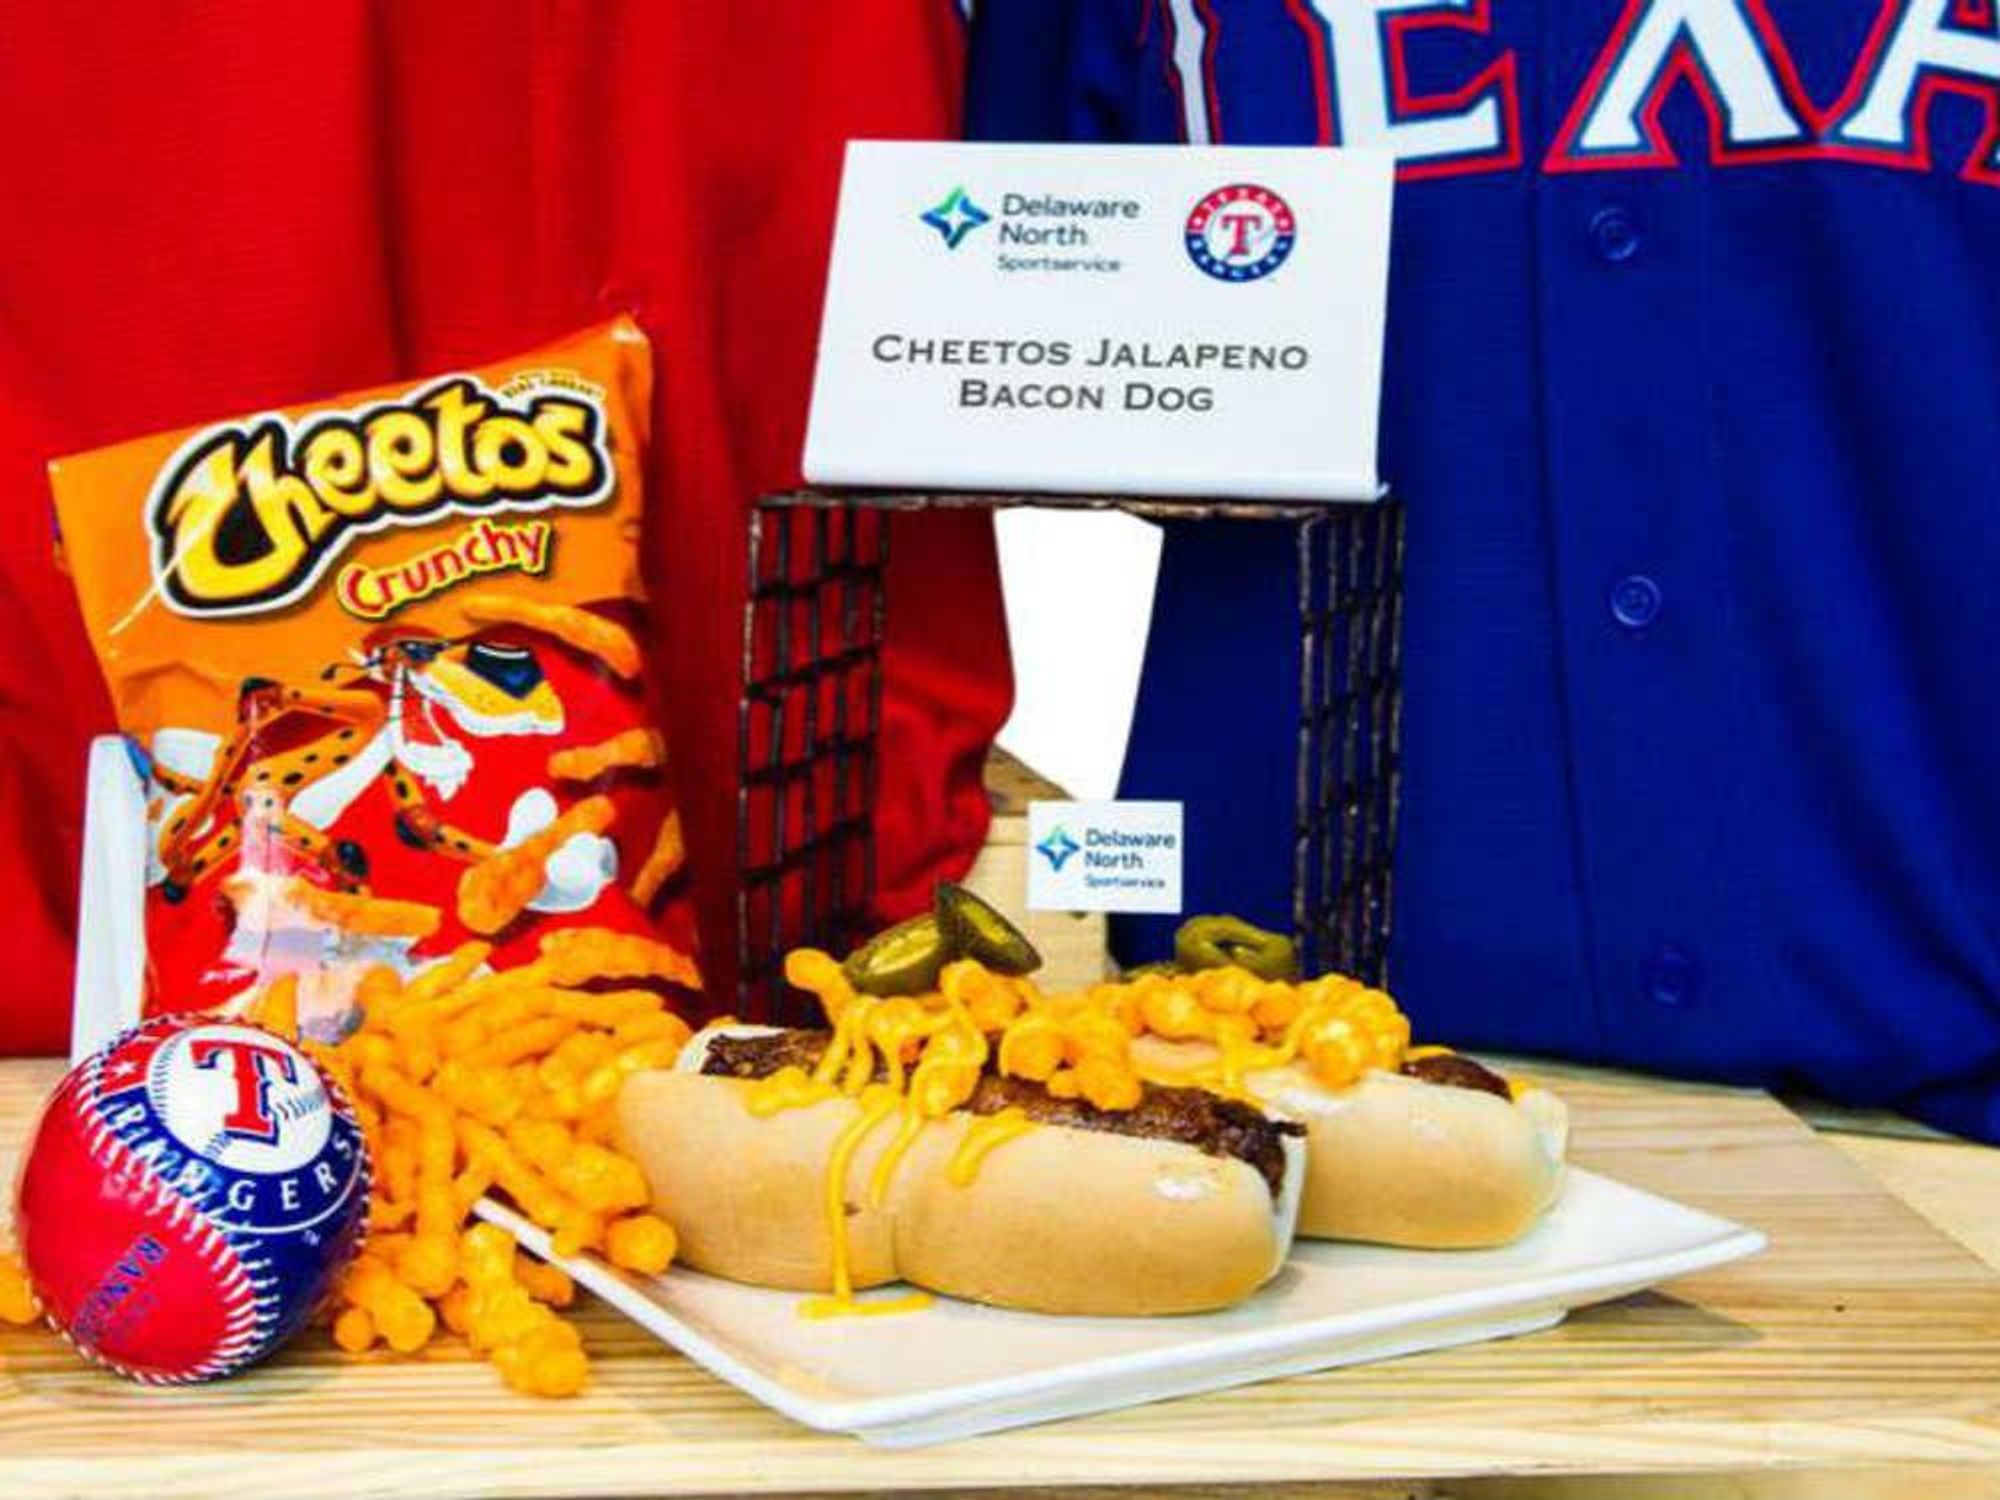 The Best and Worst of the Absurd New Rangers' Ballpark Menu